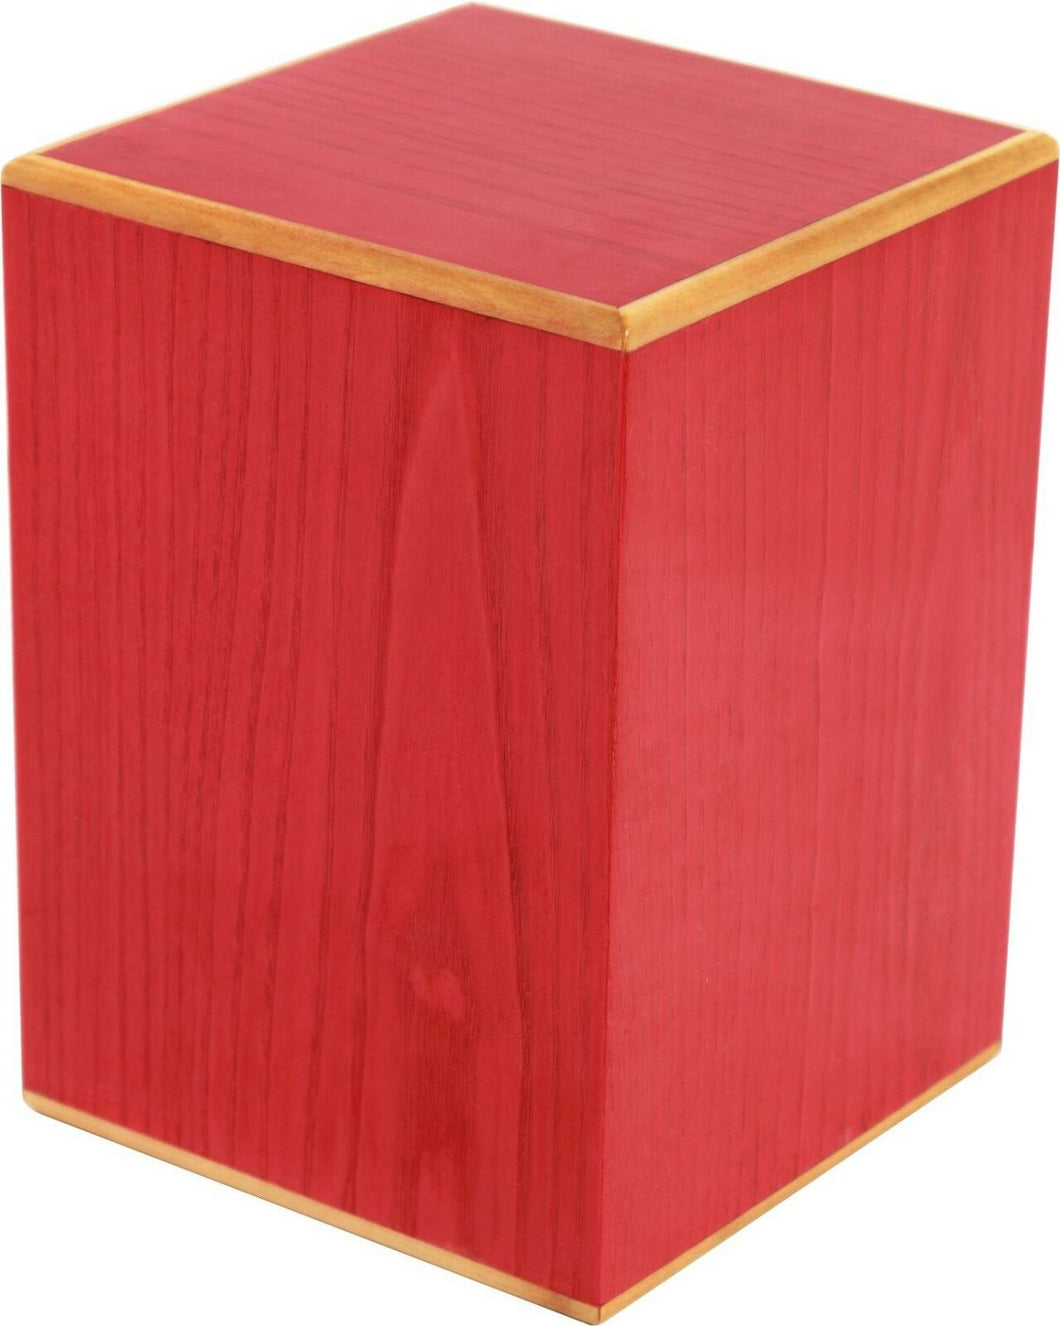 Large/Adult 210 Cubic Inches Red Box Wood Cremation Urn for Ashes